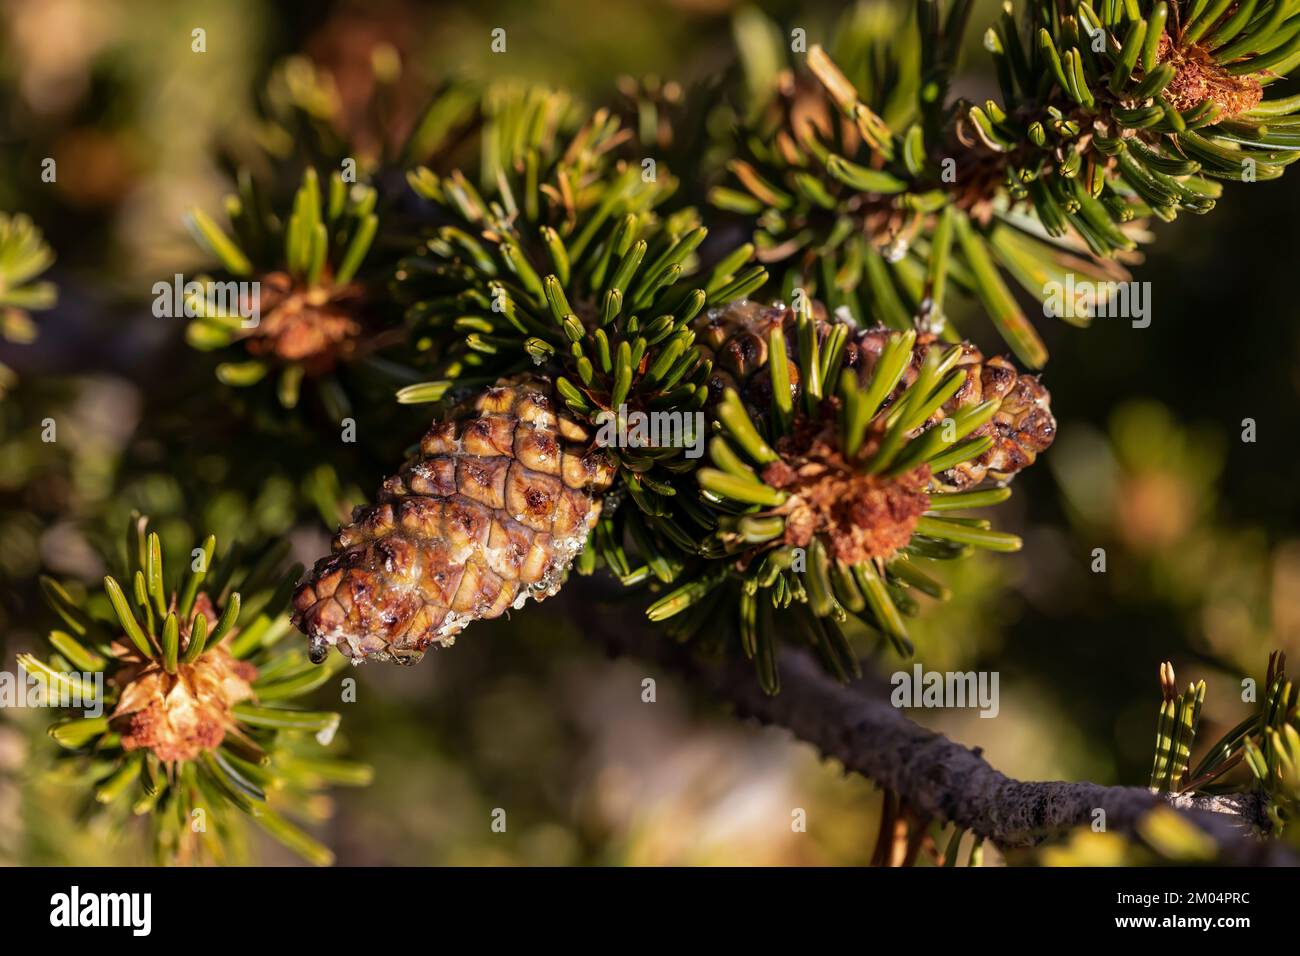 Needles and cones of Bristlecone Pine, Pinus longaeva, in Ancient Bristlecone Pine Forest, Inyo National Forest, California, USA Stock Photo